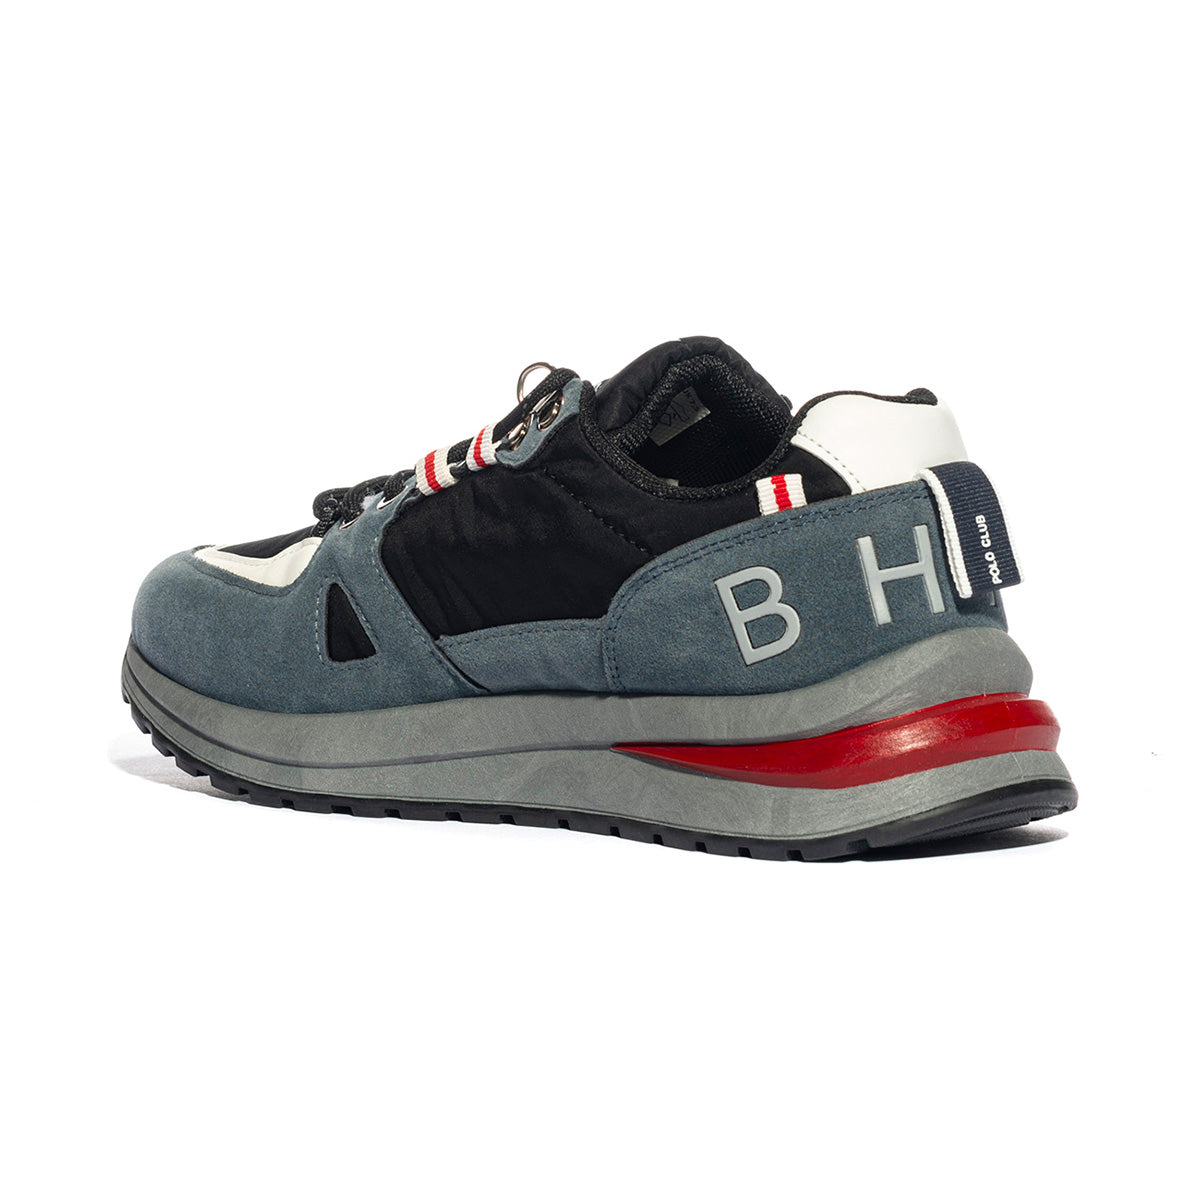 SNeakers Beverly Hills Polo club Hm8495 BLu